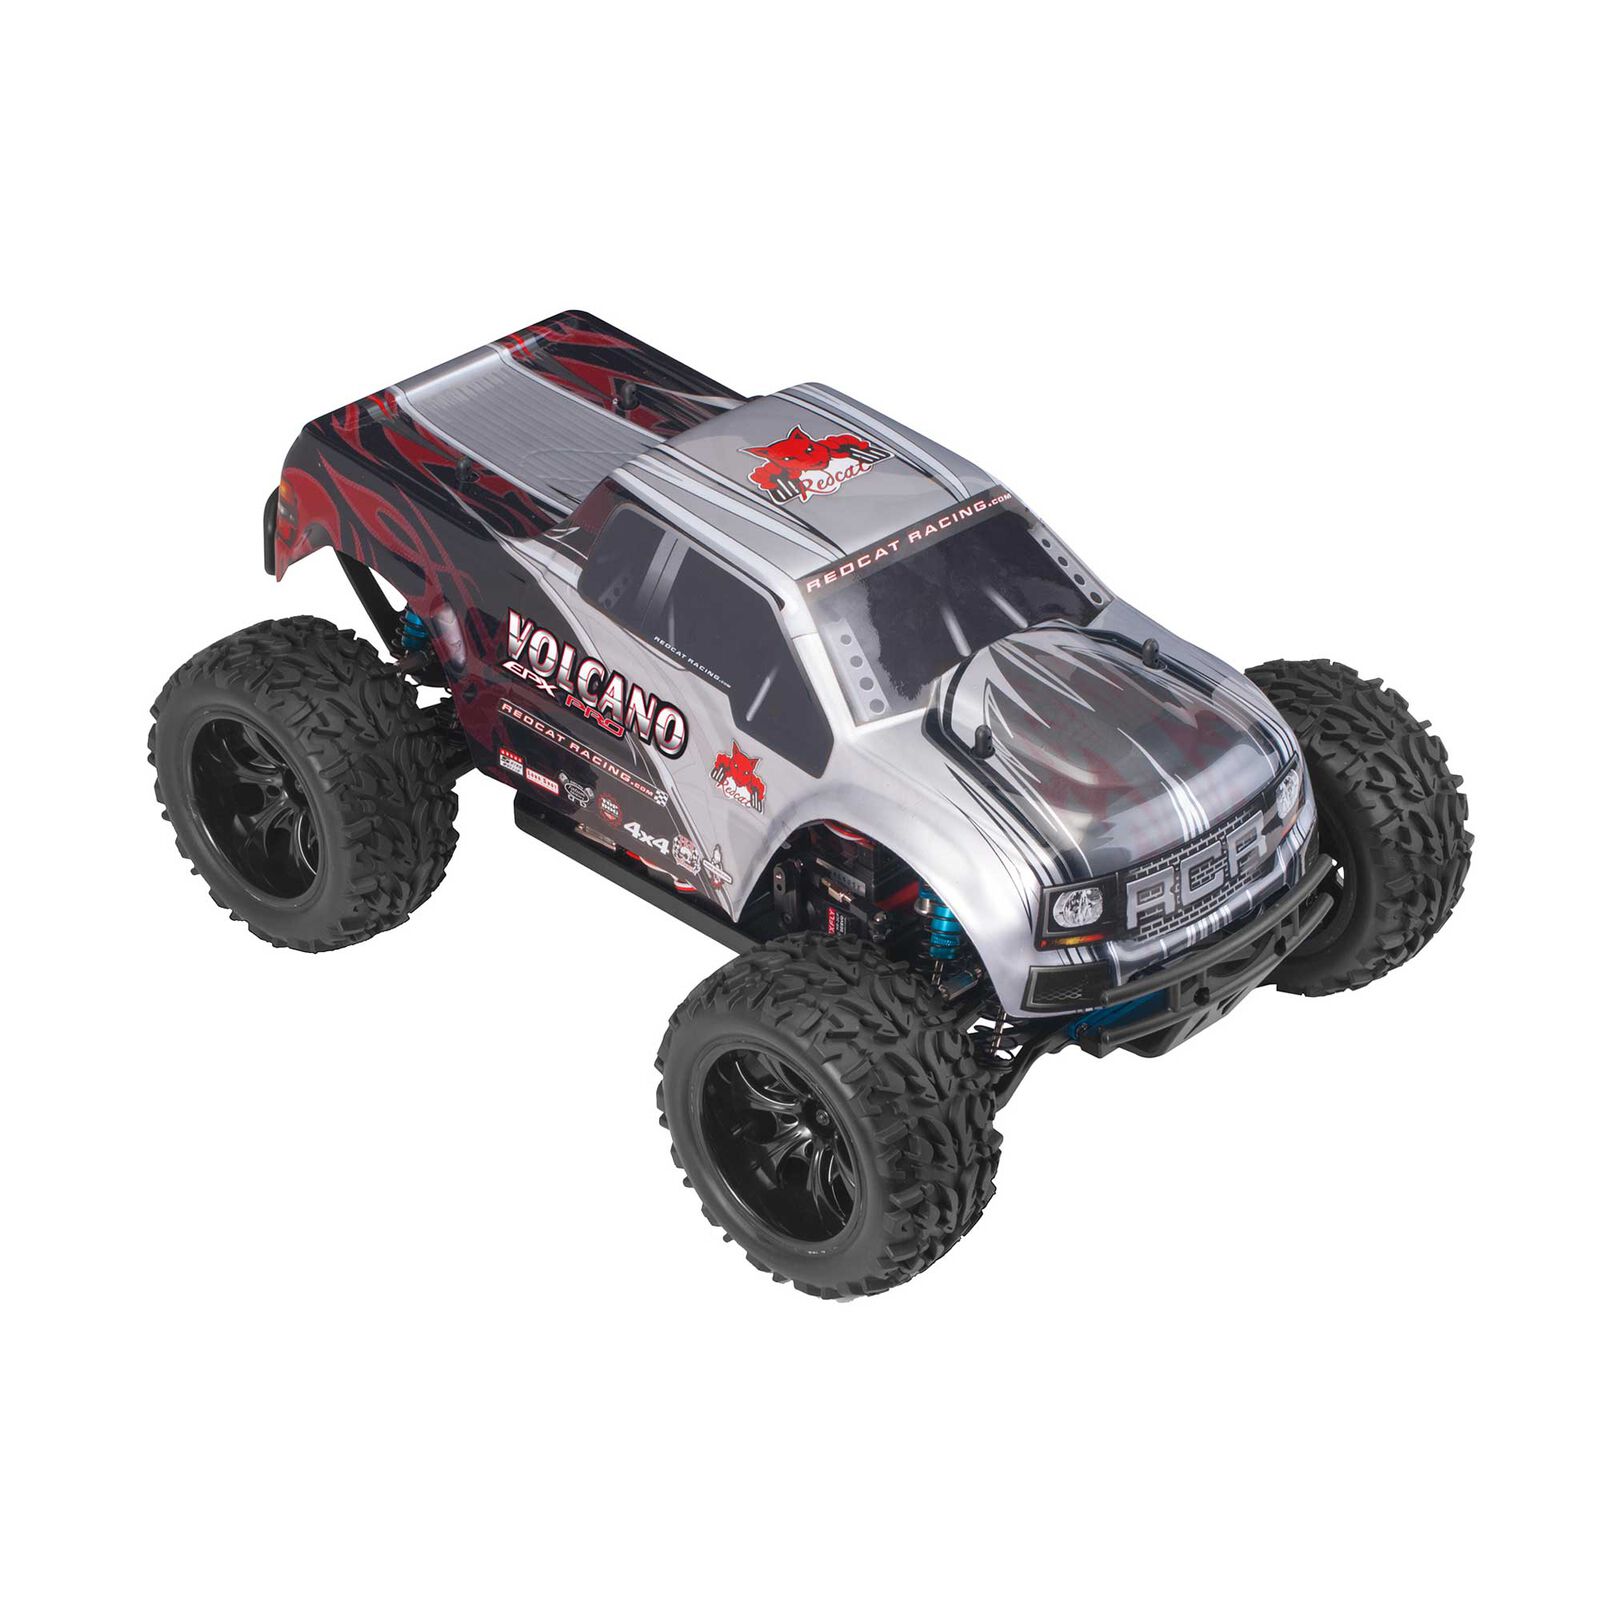 Redcat Racing 1/10 Volcano EPX PRO 4WD Monster Truck Brushless RTR